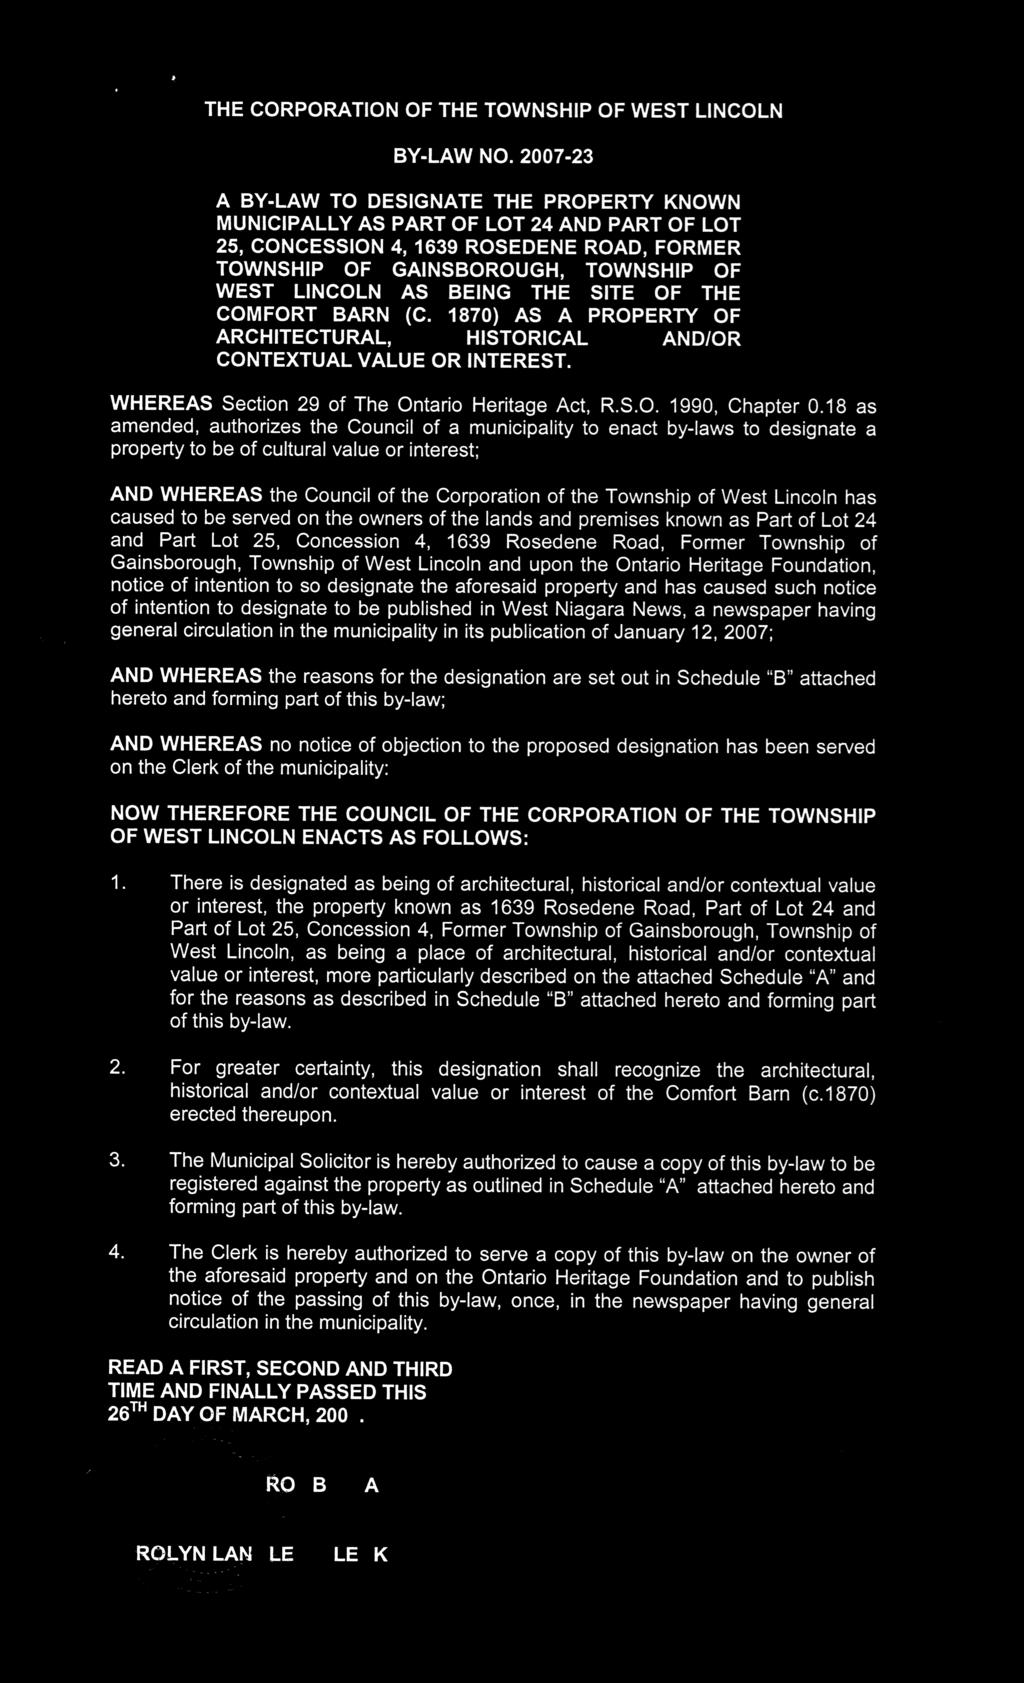 THE CORPORATION OF THE TOWNSHIP OF WEST LINCOLN BY-LAW NO.